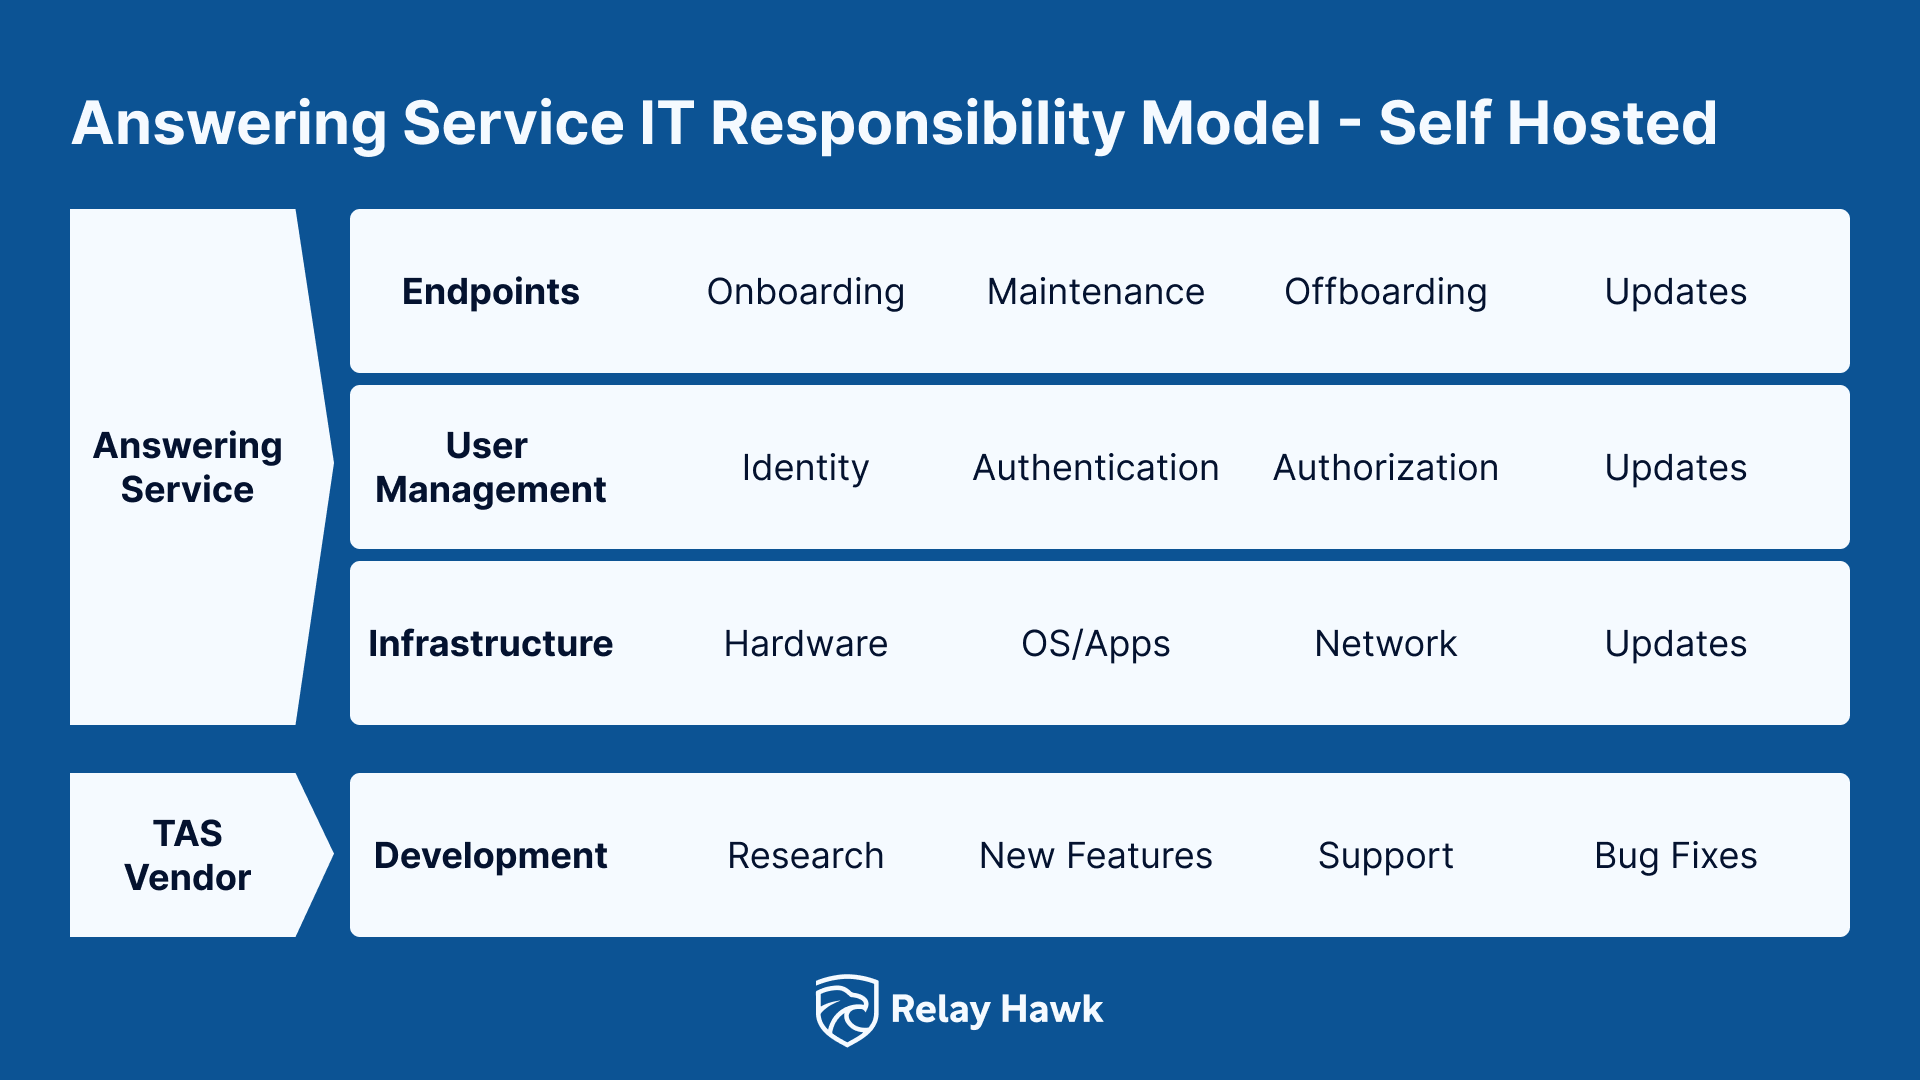 Answering Service IT Responsibility Model - Self Hosted